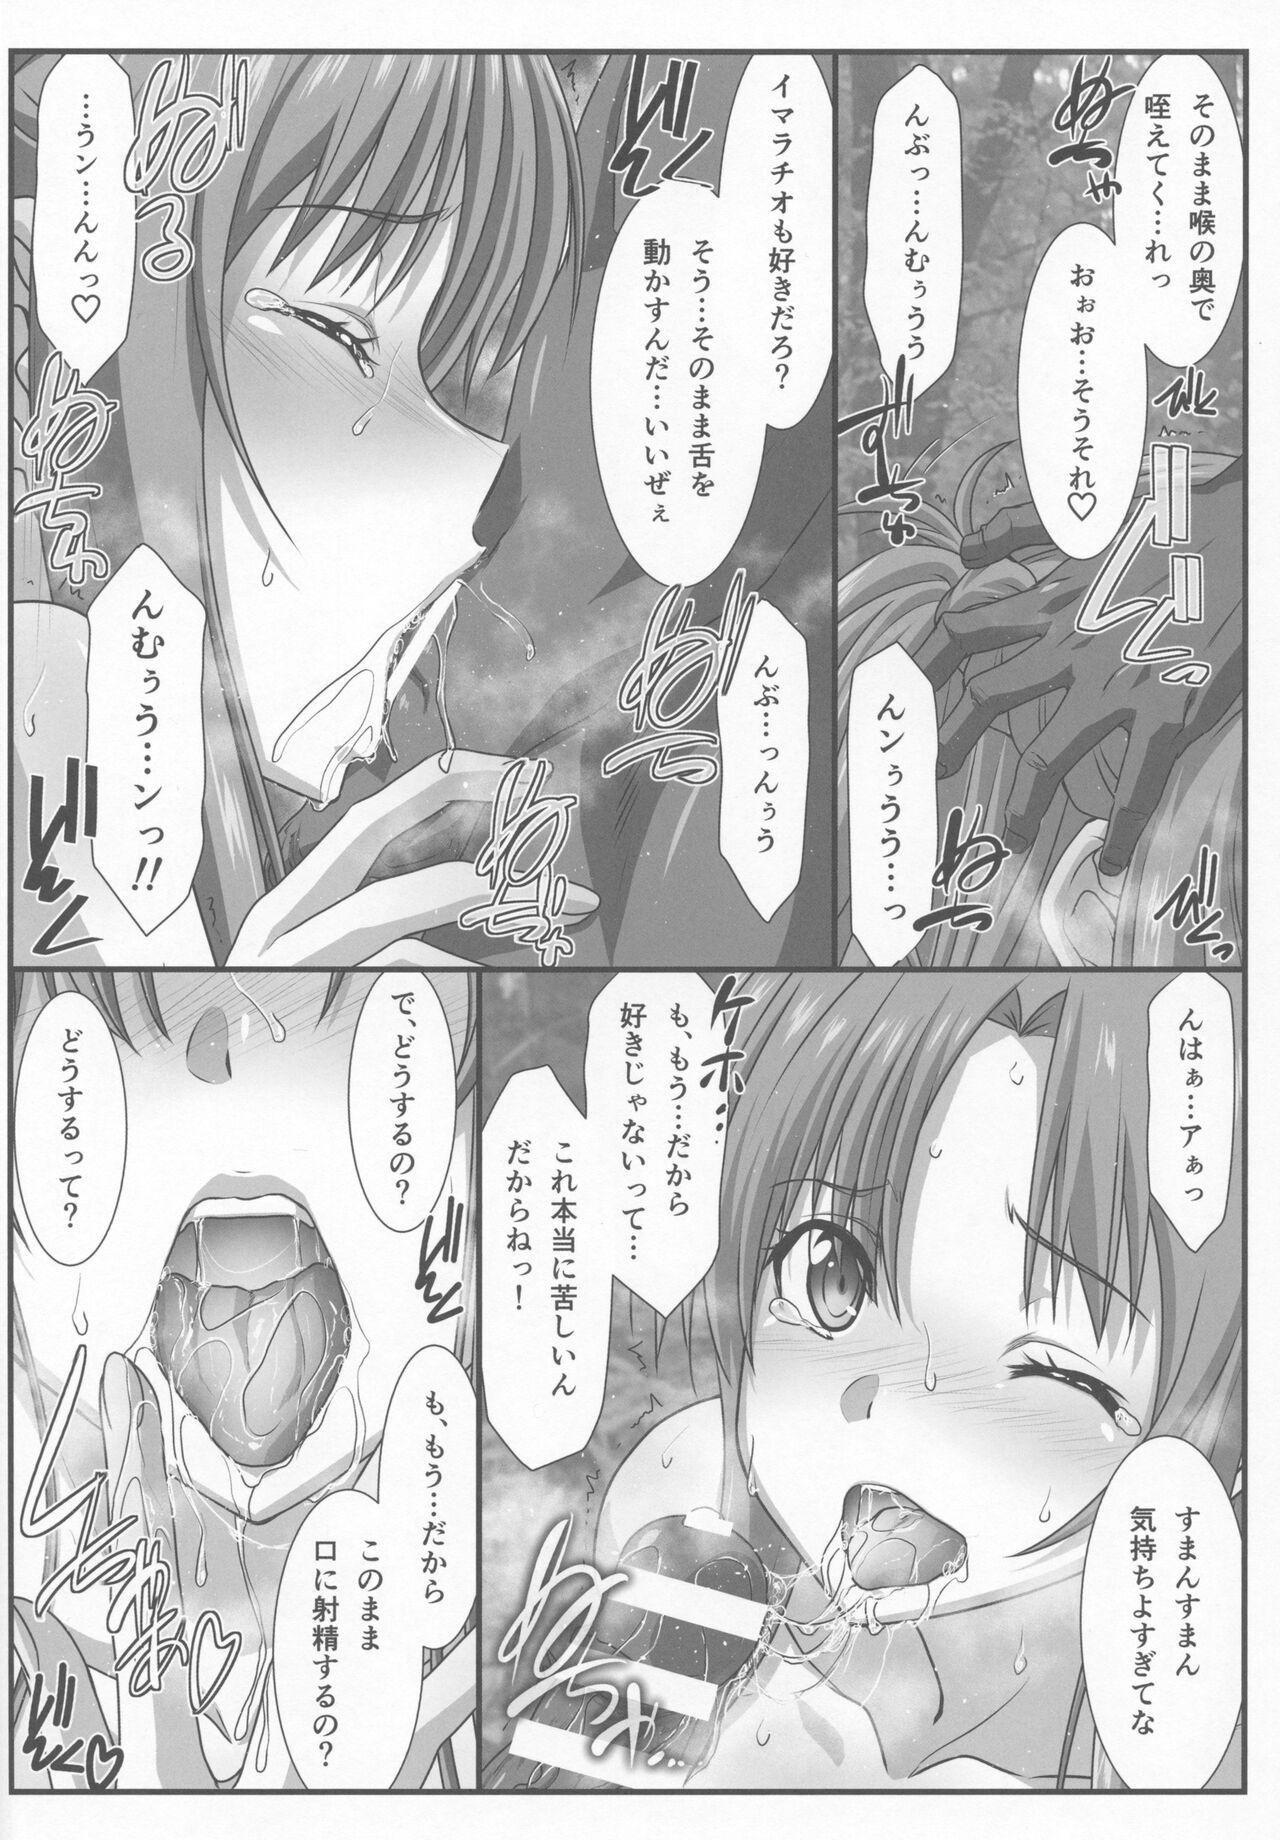 Shy Astral Bout Ver. 45 - Sword art online Blond - Page 7